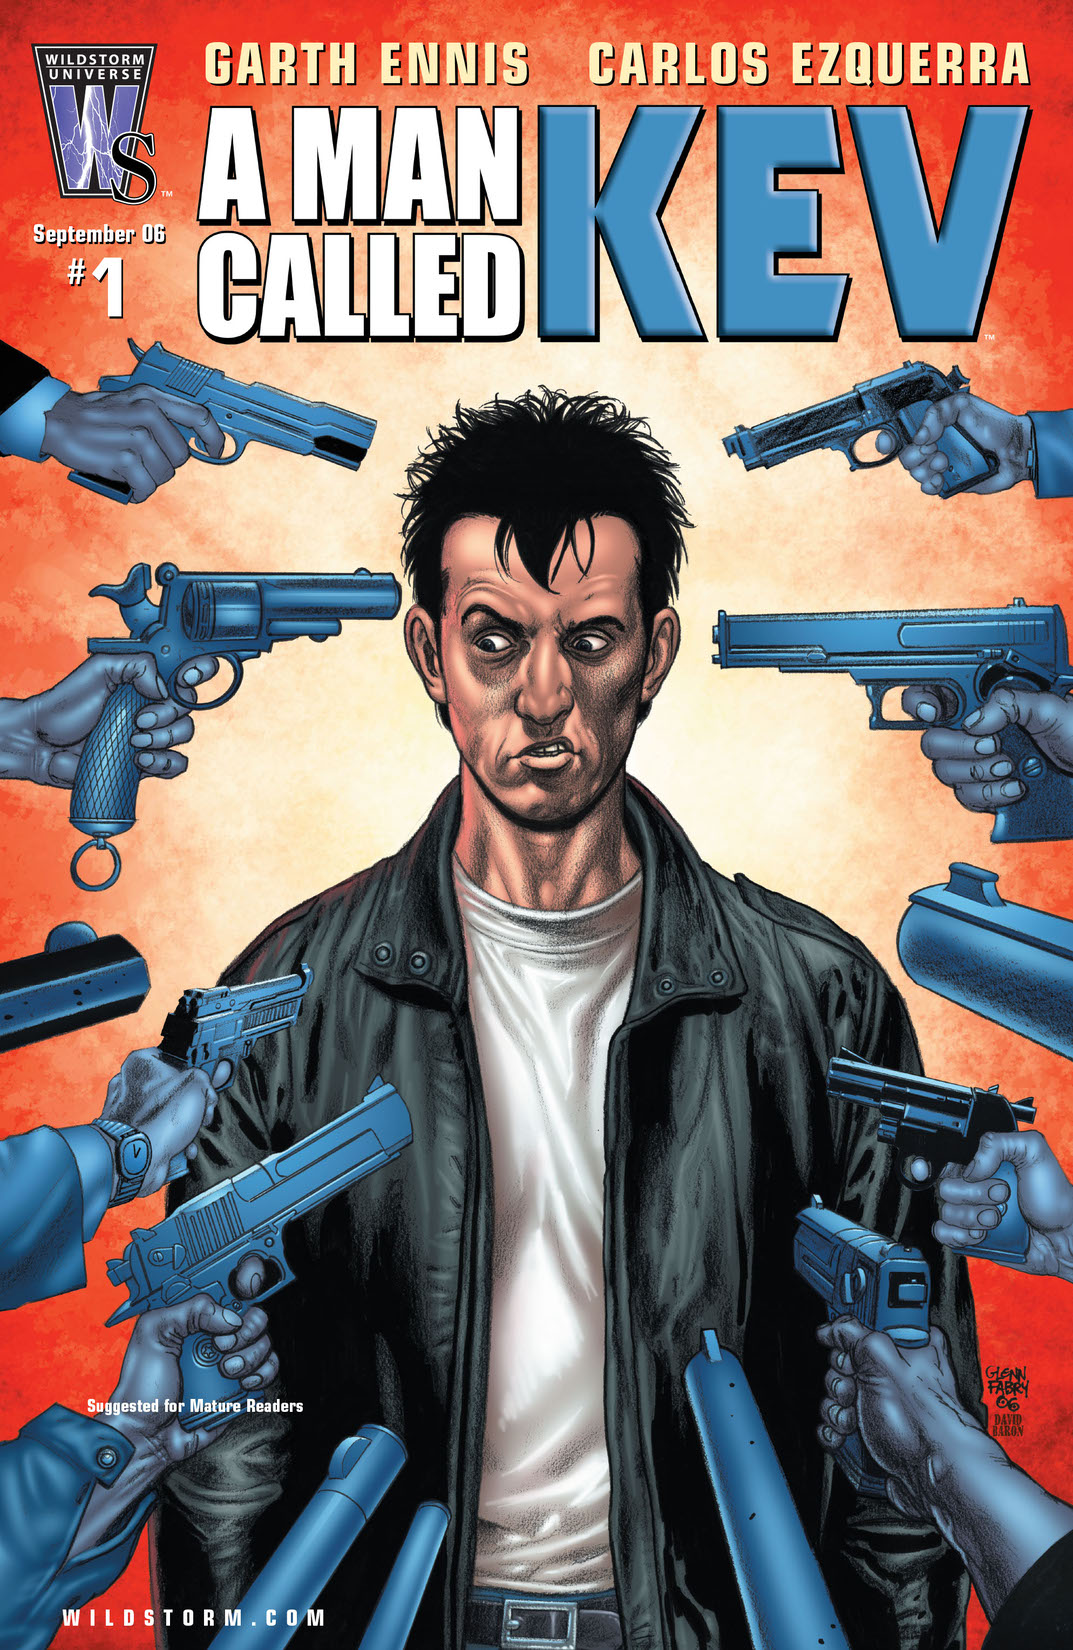 A Man Called Kev #1 preview images